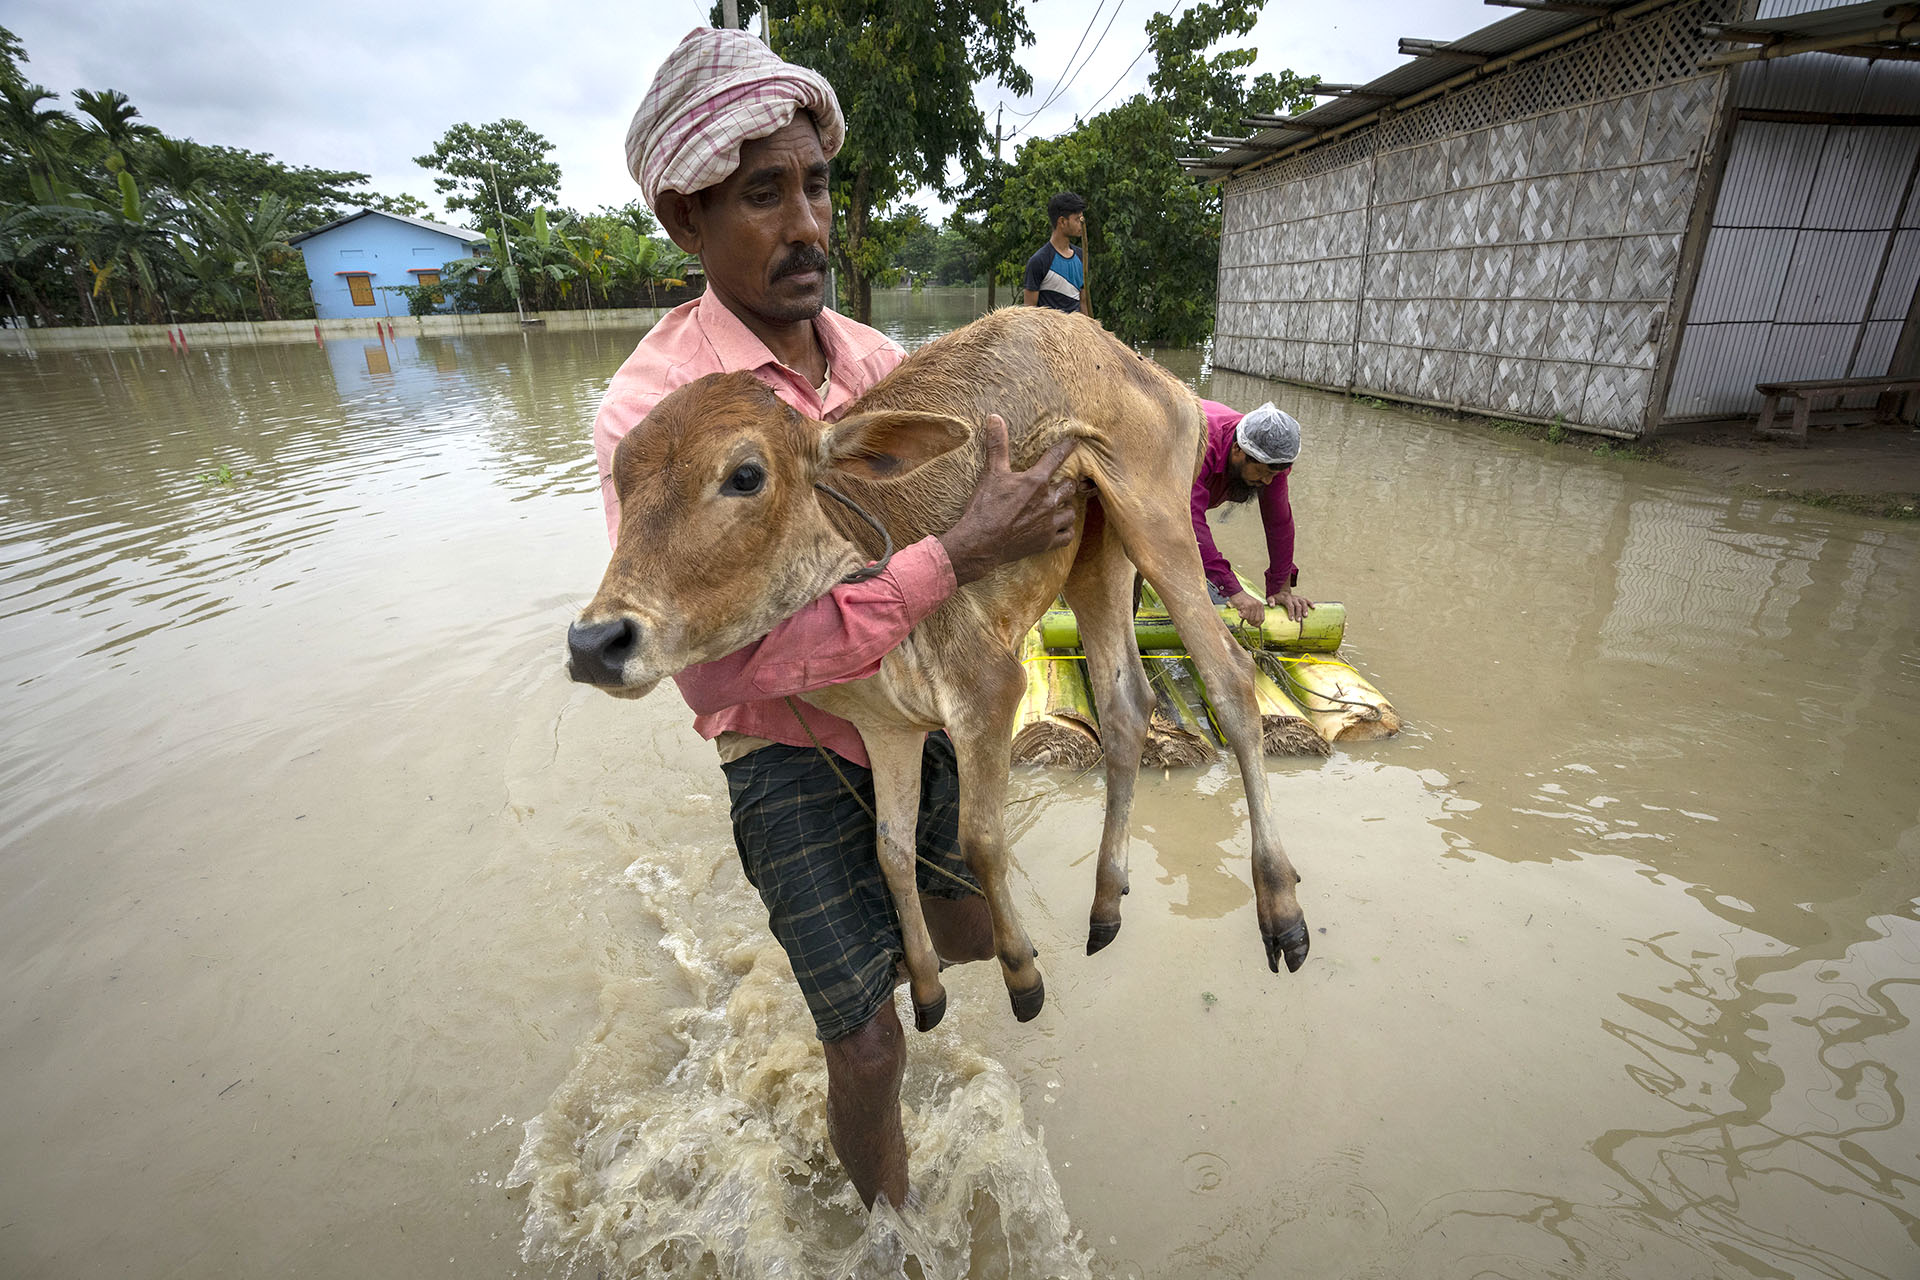 A person carries animals in India (AP Photo / Anupam Nath)